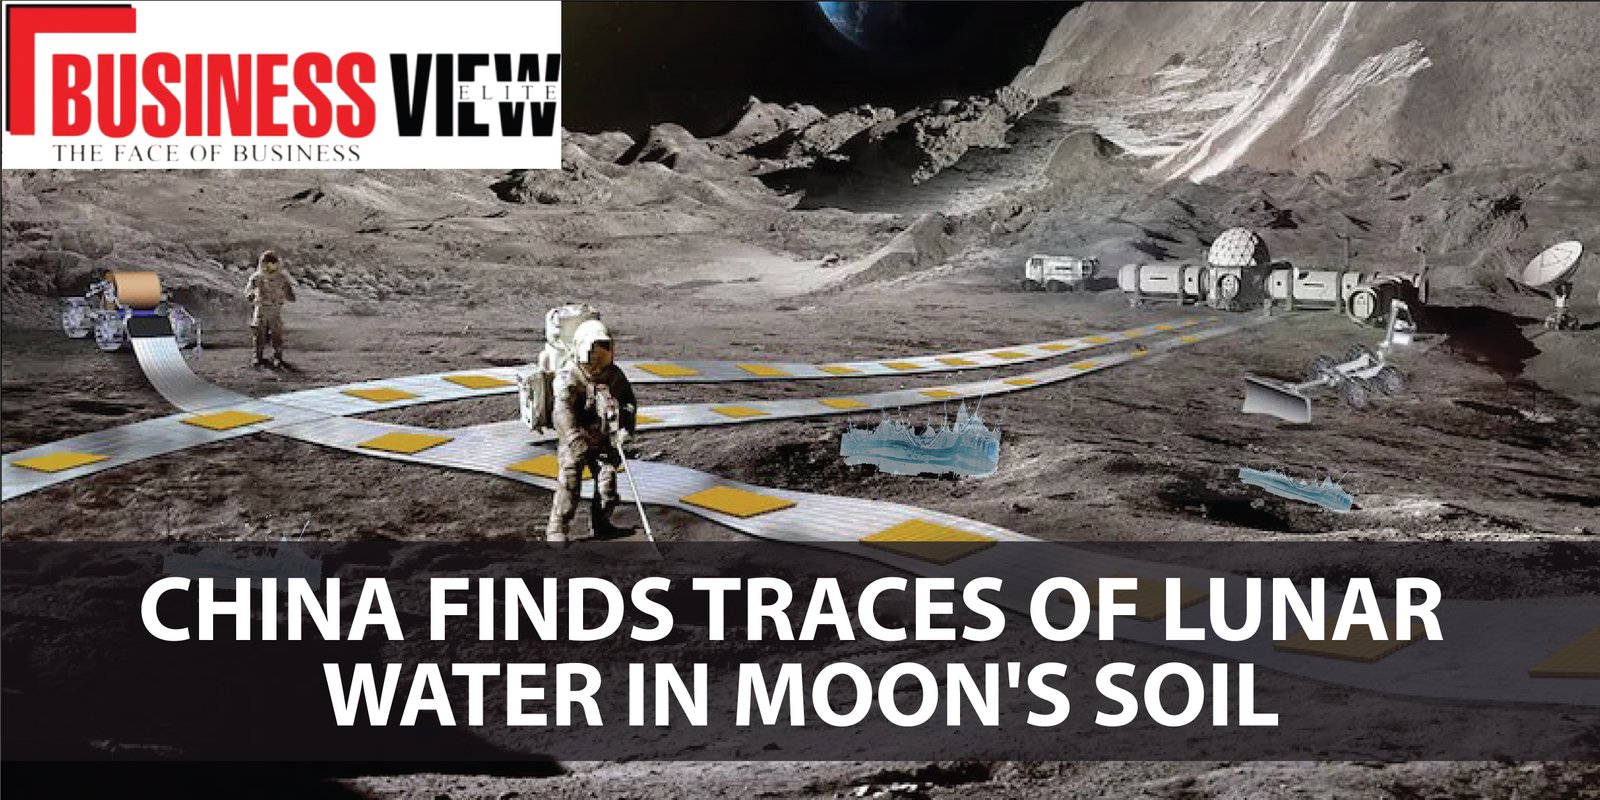 China finds traces of lunar water in the moon's soil